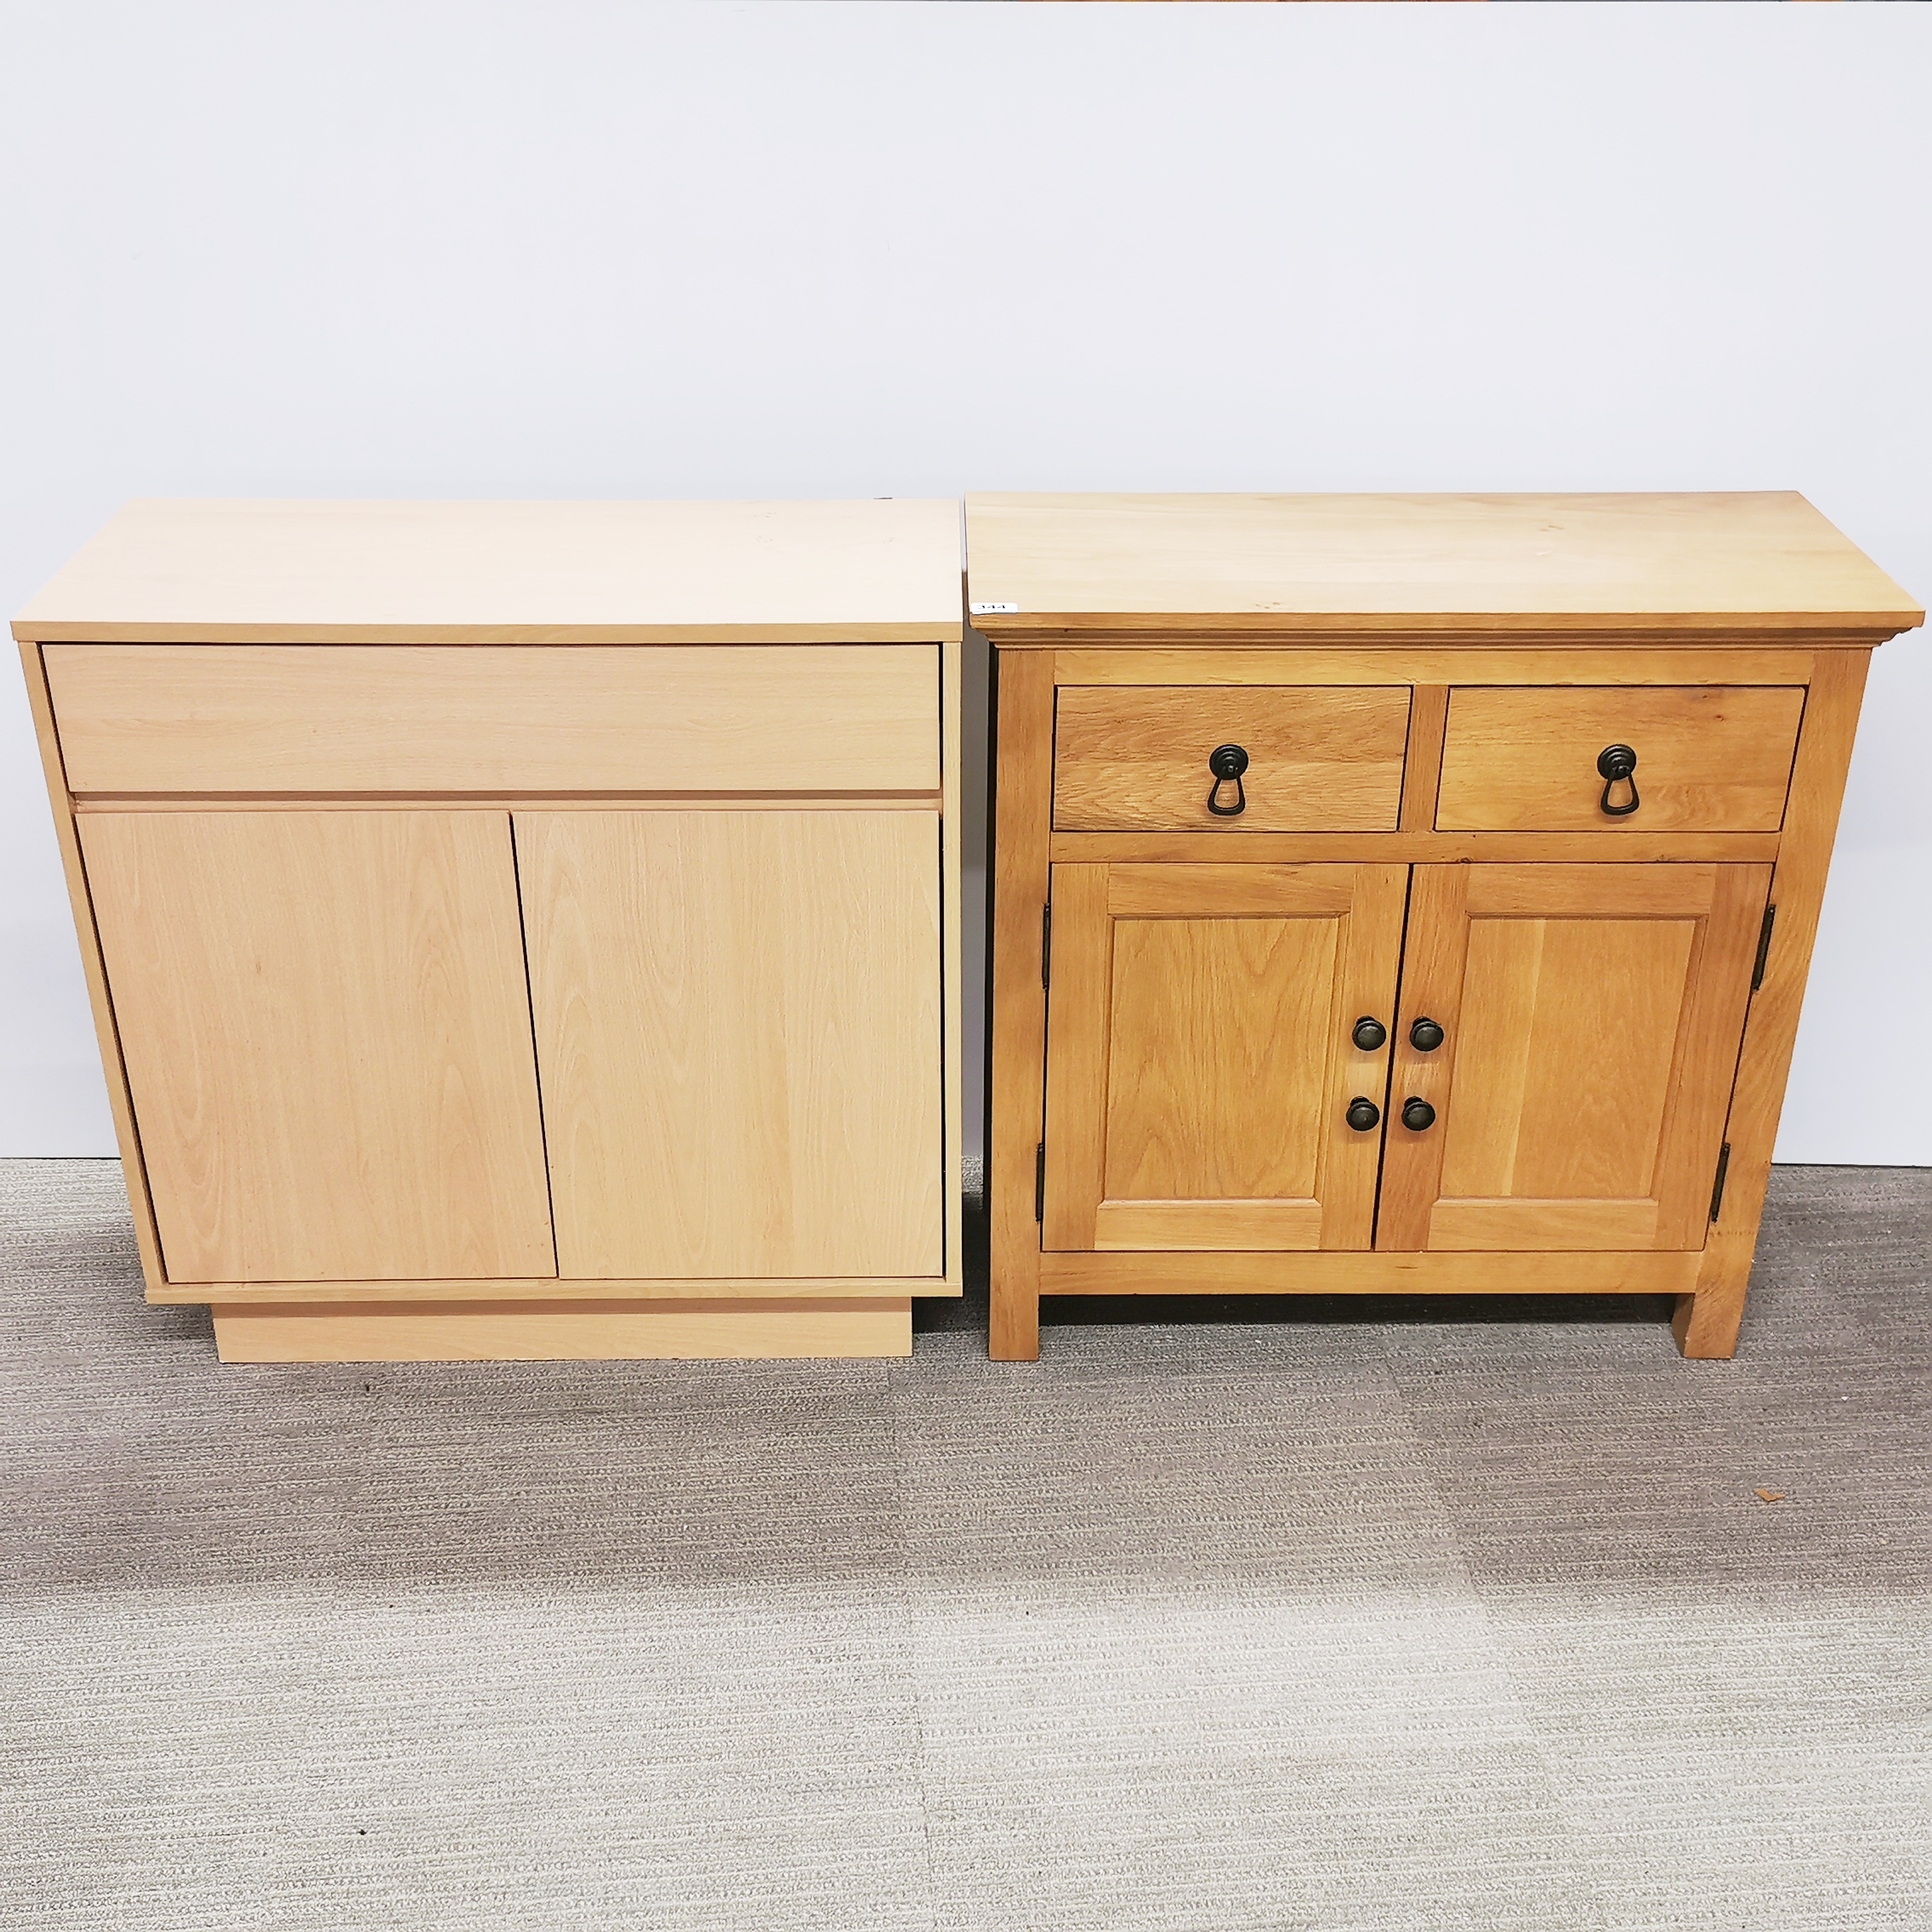 A modern light oak cabinet together with an oak effect single drawer cabinet, largest 80 x 80 x